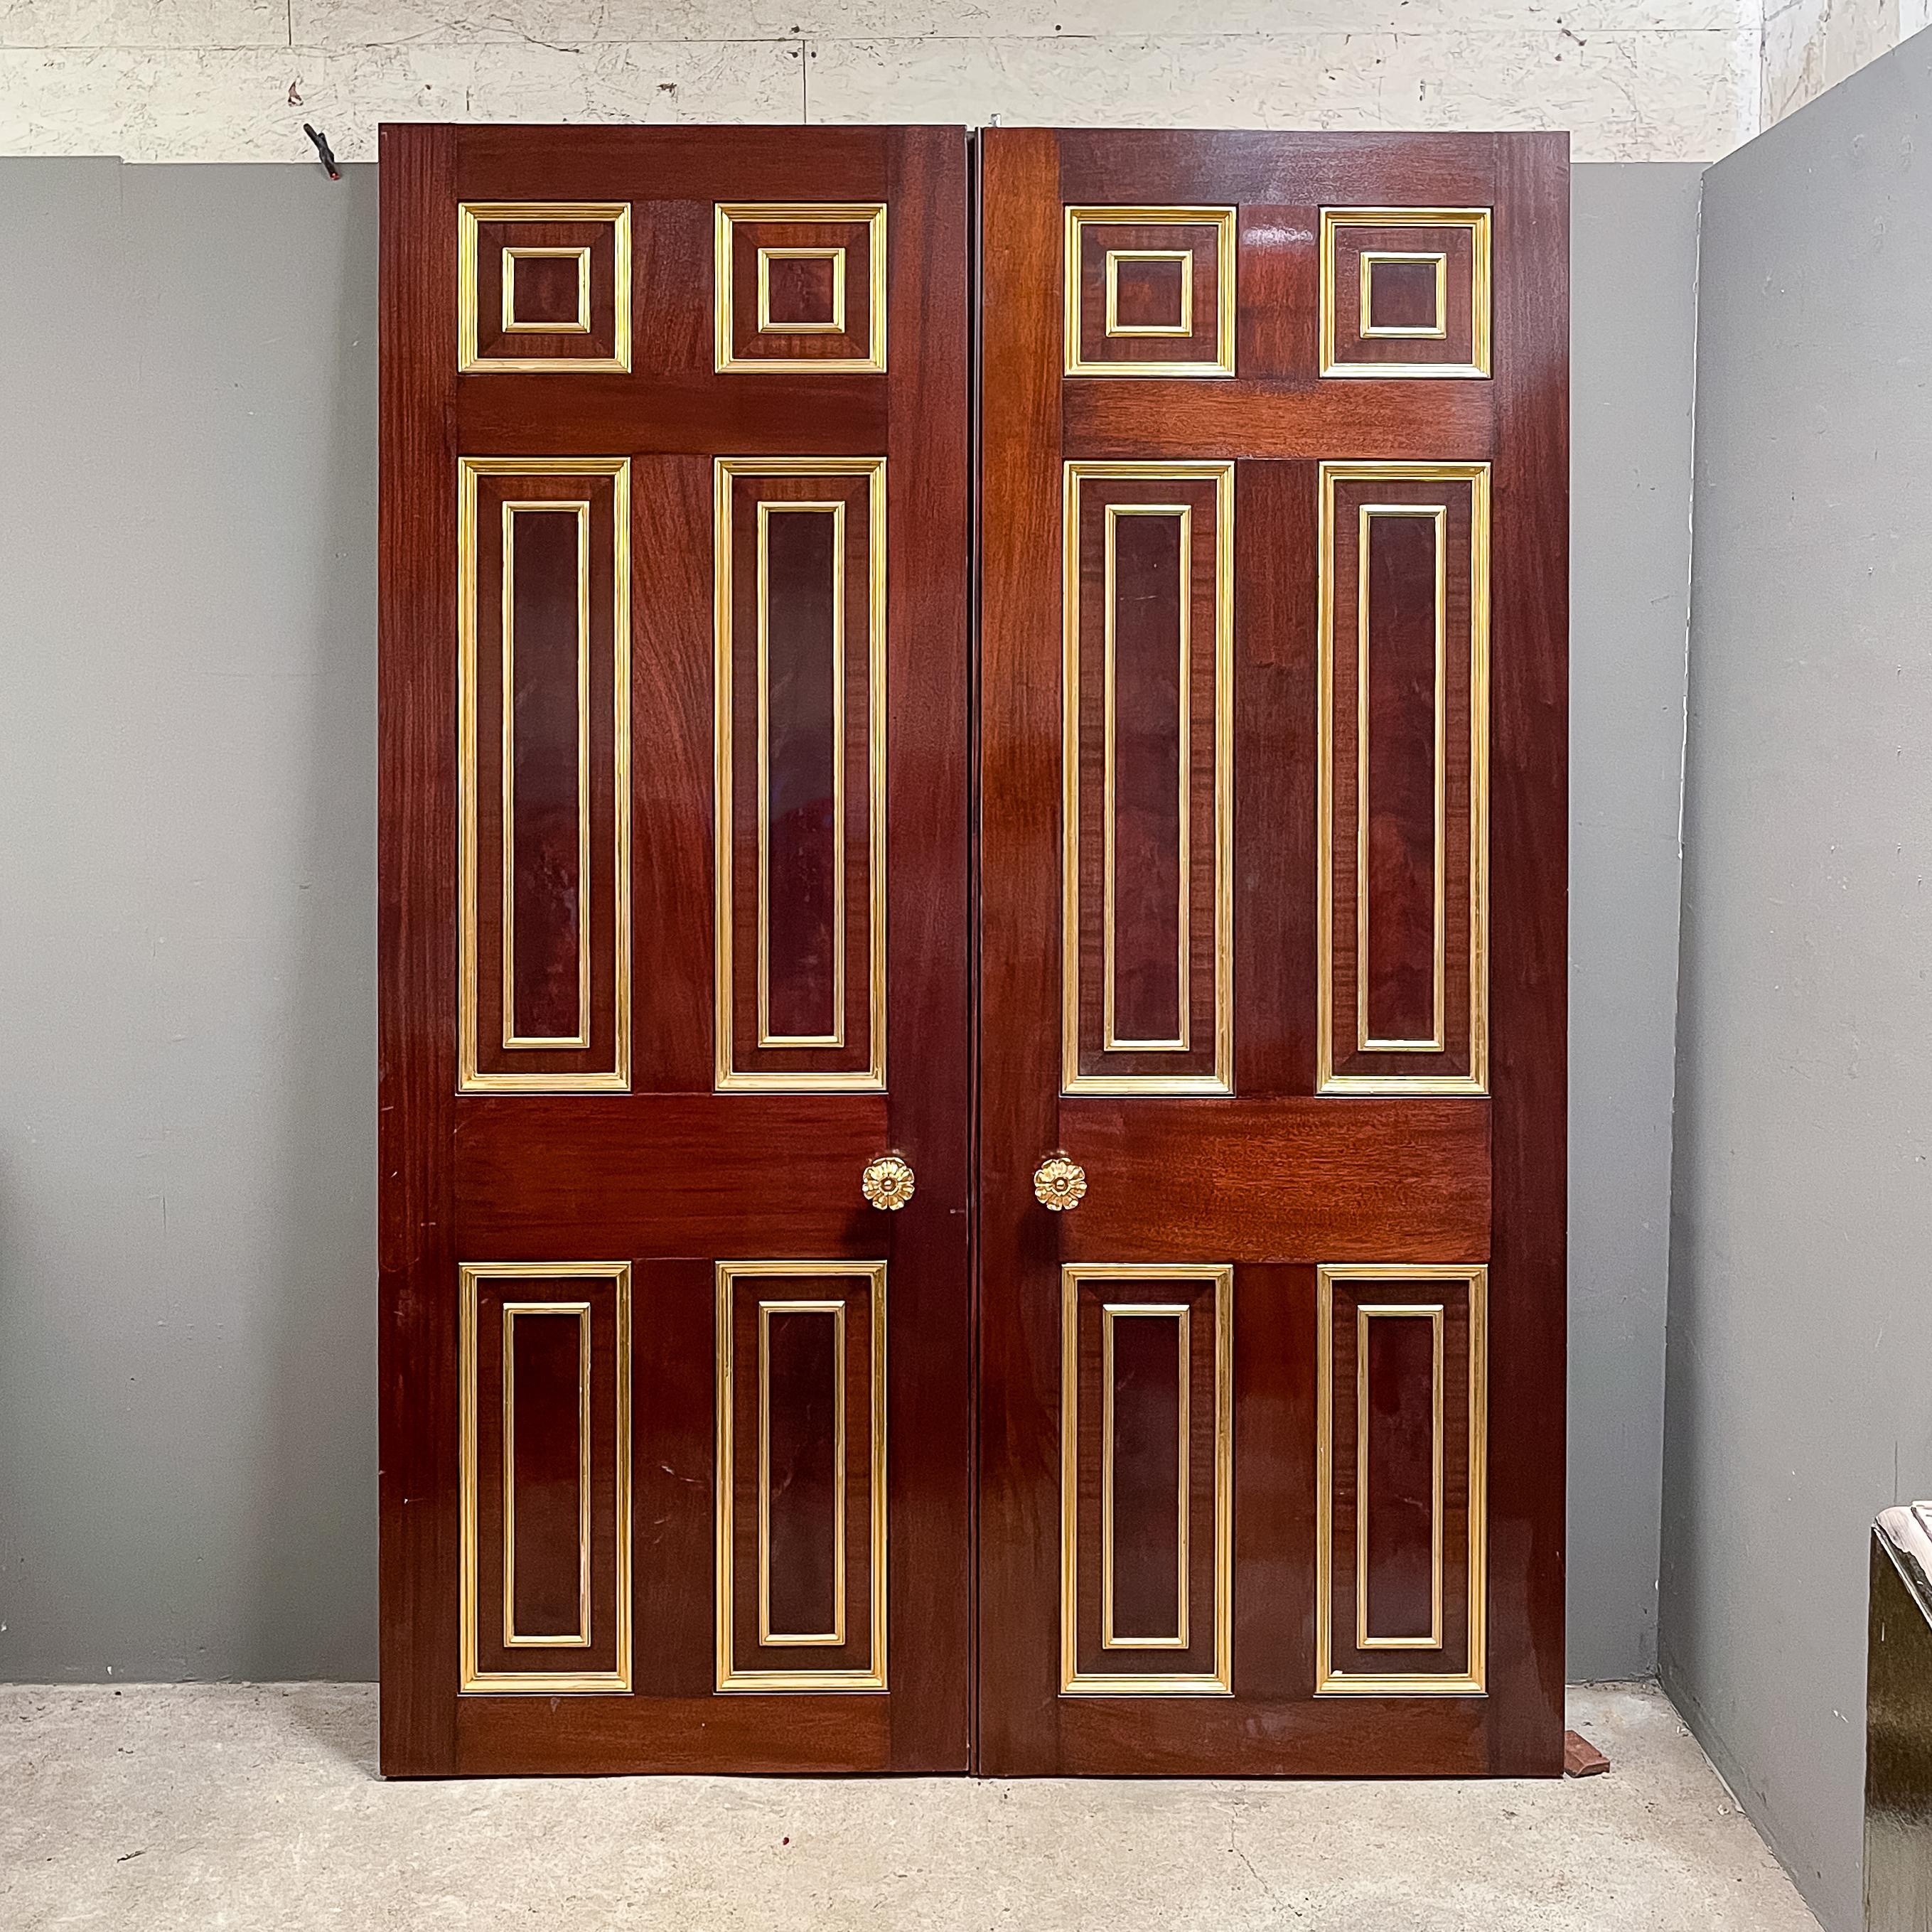 A set of English Mahogany entrance doors, each side with parcel-gilded fielded panels - a pair of square panels, above two long and two short, each side of each leaf centred with a gilt-metal flowerhead boss, the doors hung on well-specified hinges